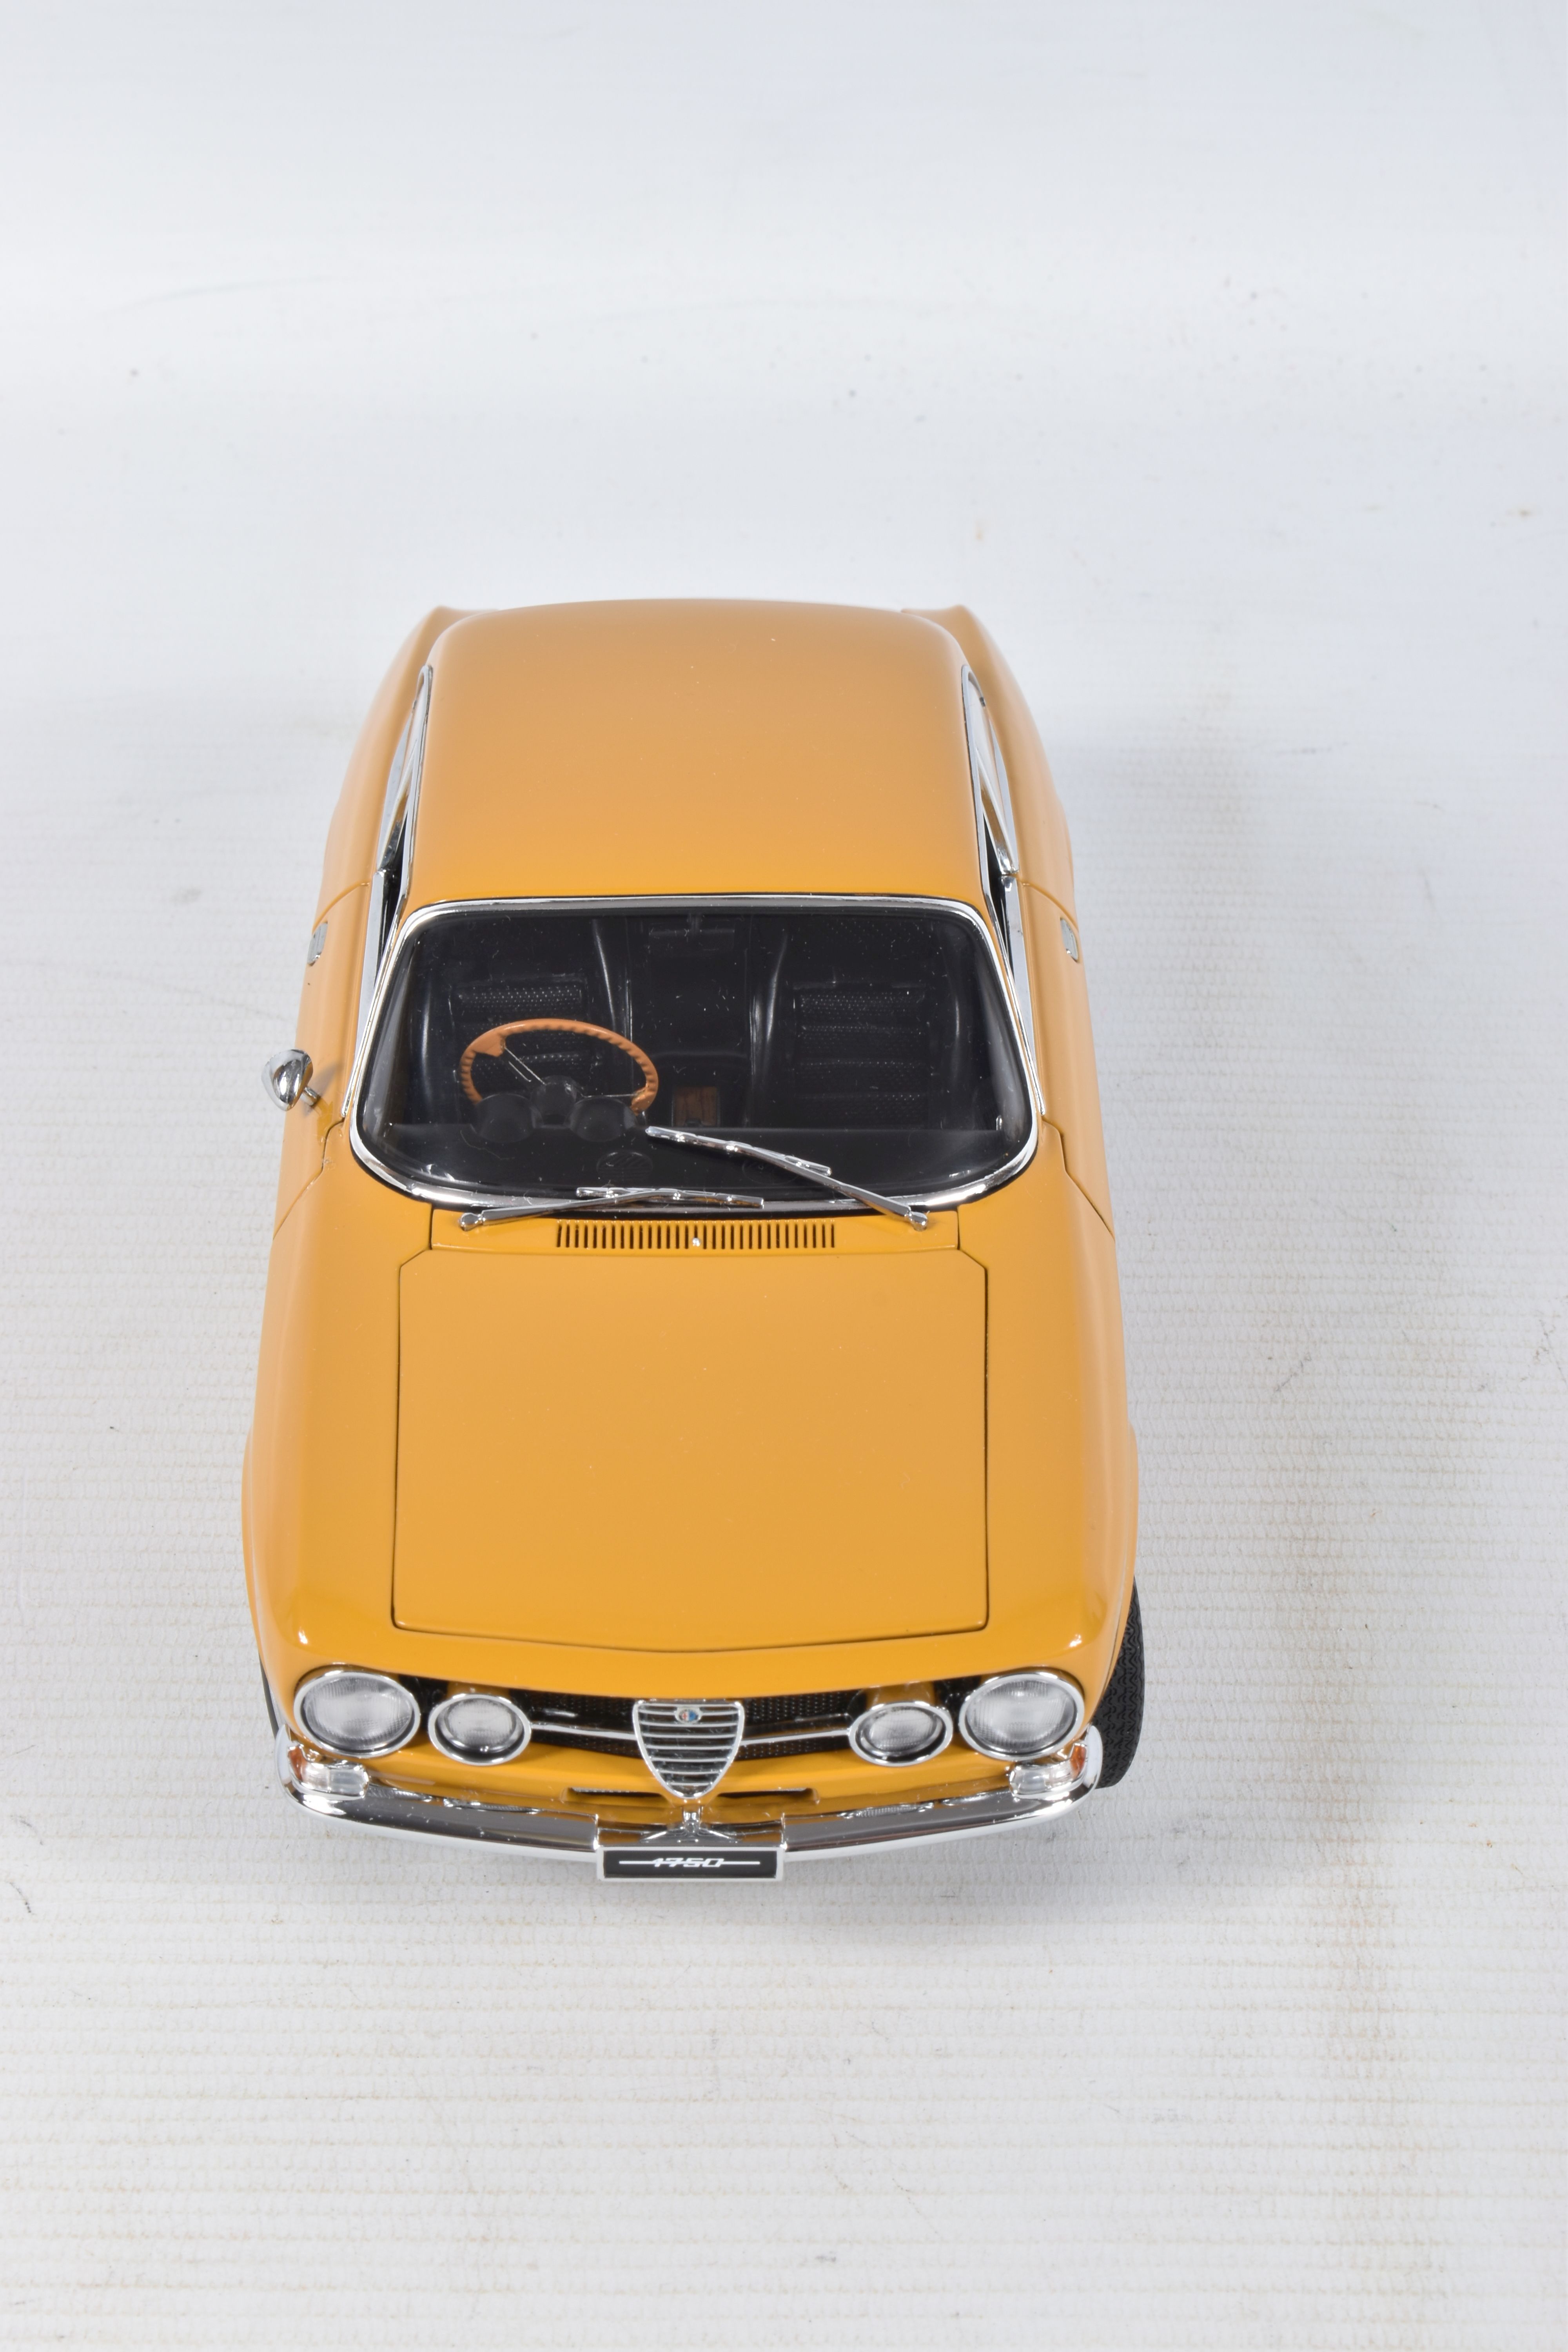 A BOXED AUTOART ALFA ROMEO 1750 GTV SCALE 1:18 MODEL VEHICLE, numbered 70108, painted mustard - Image 6 of 6